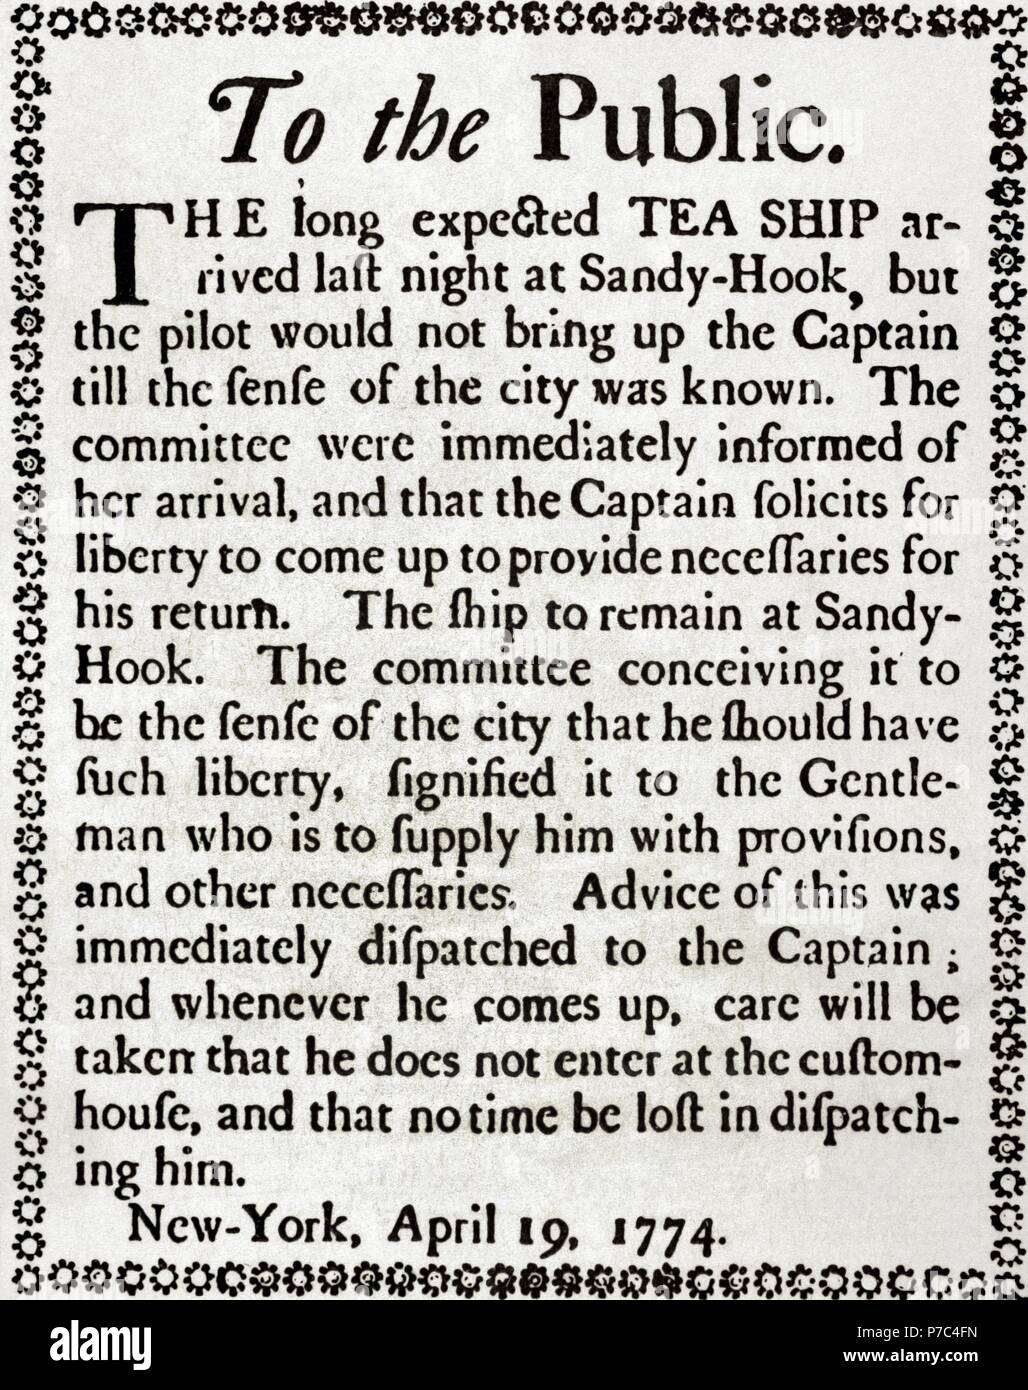 History of the United States. New York's Tea Party. Handbill about boycotting the ship loaded with English tea newly arrived in Sandy Hook. New York, April 19, 1774. Stock Photo